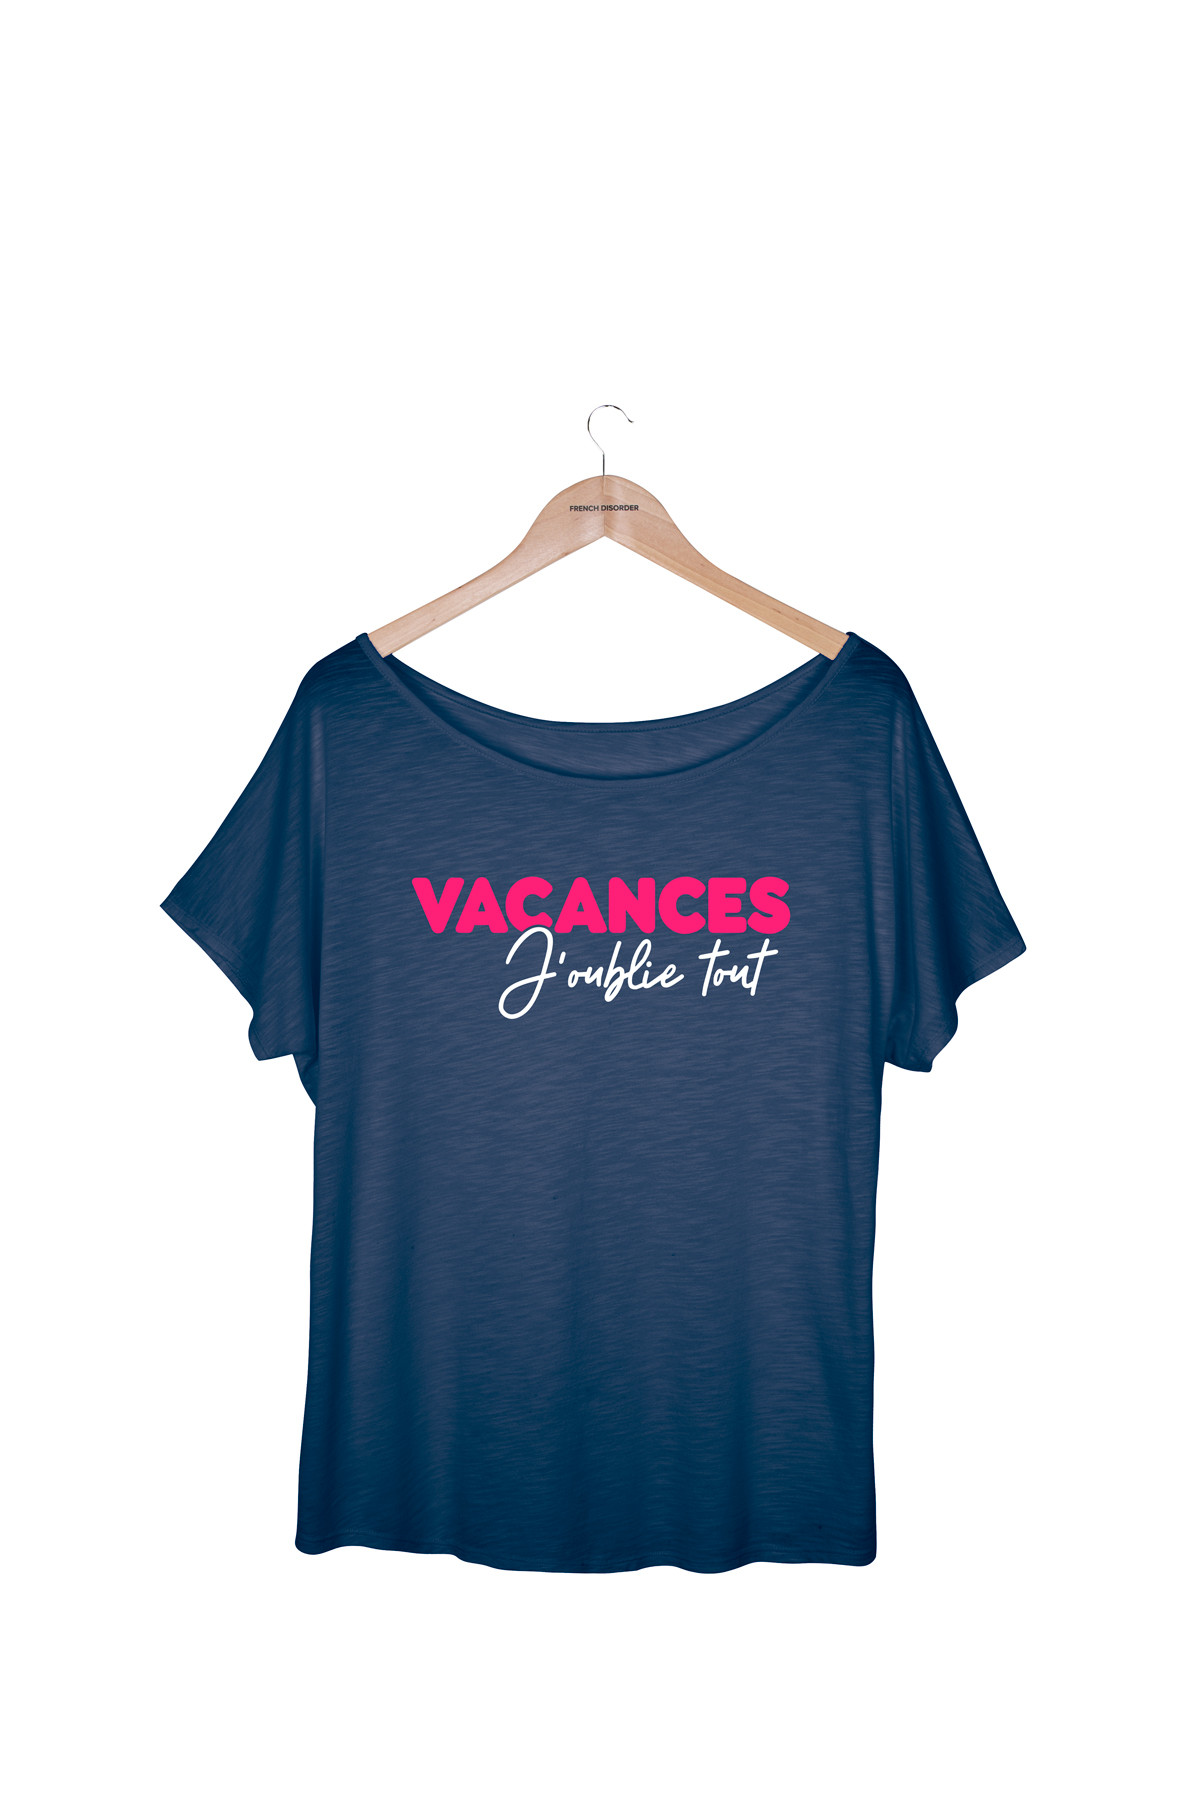 Tshirt flammé VACANCES J'OUBLIE TOUT French Disorder